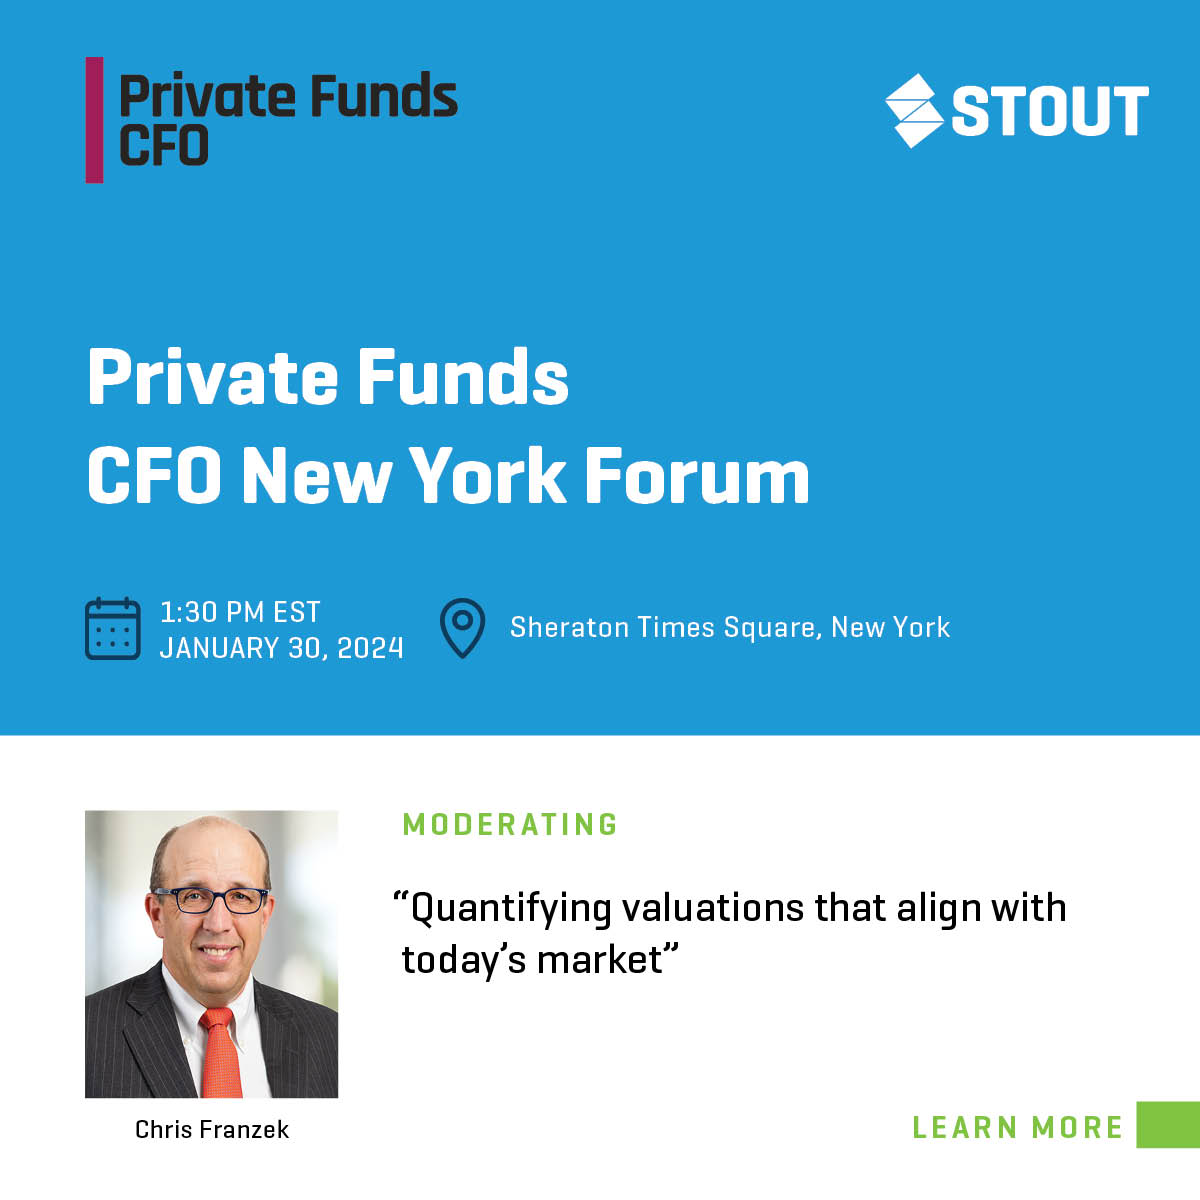 Stout looks forward to sponsoring the 2024 Private Funds CFO New York Forum. Join to see Stout's Chris Franzek moderate the breakout session, 'Quantifying valuations that align with today's market.' Learn more: bit.ly/41oLWV8